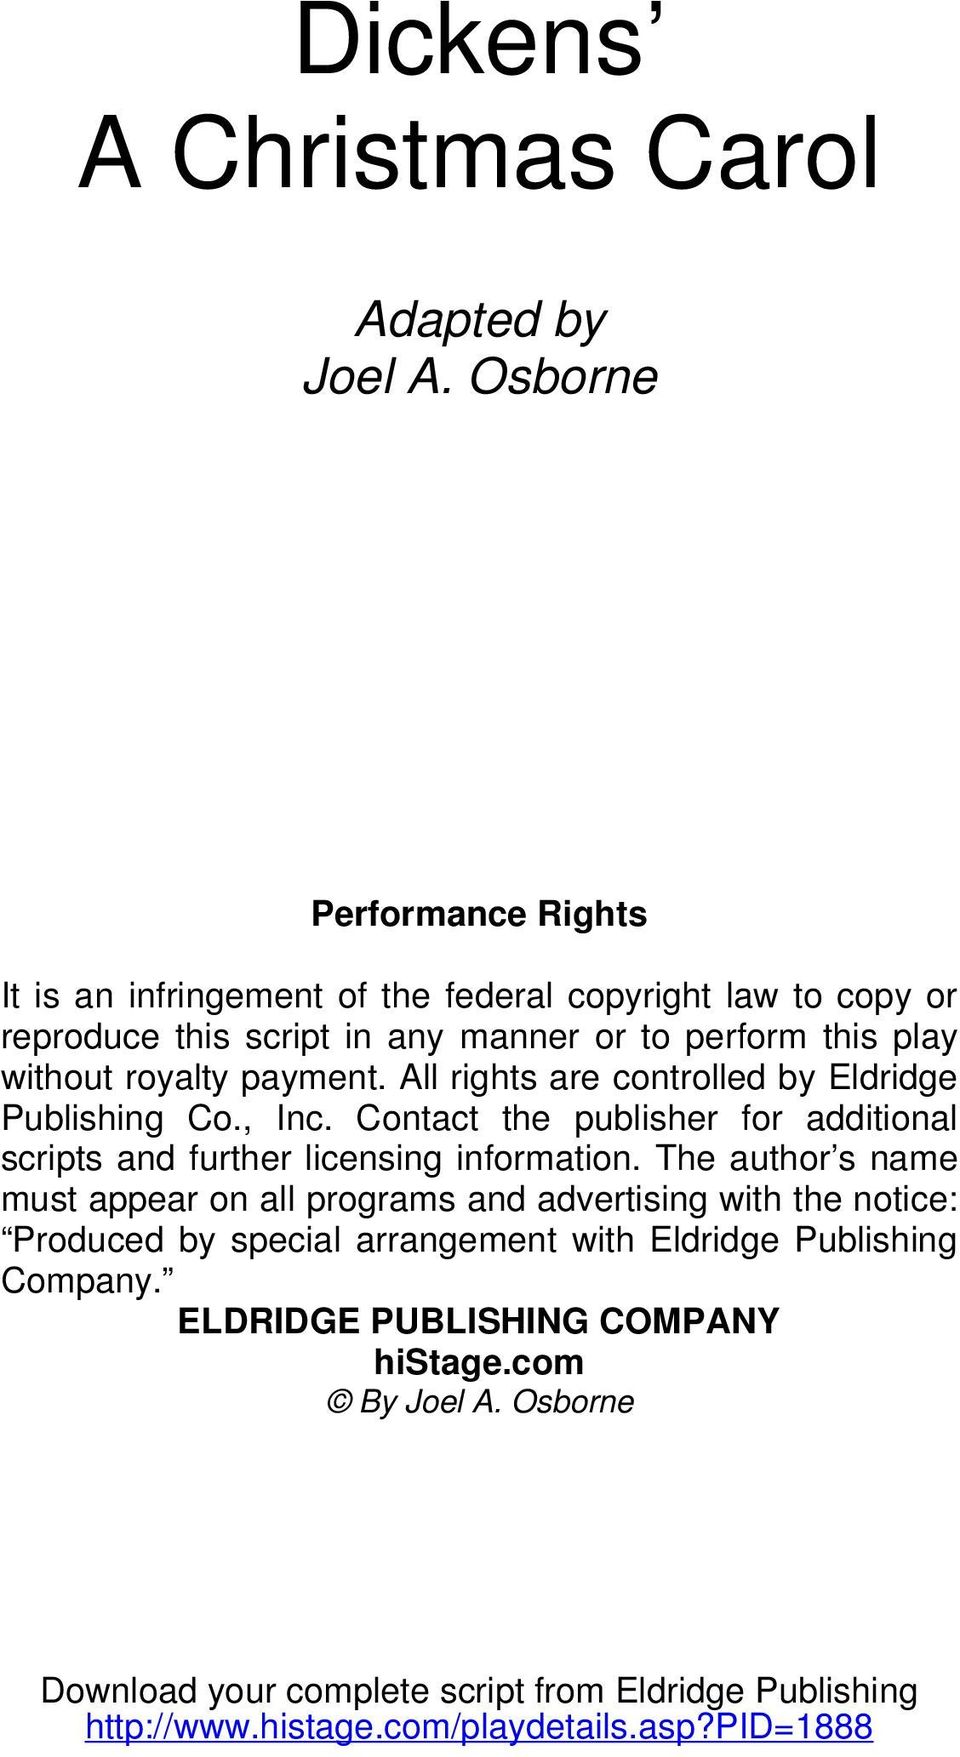 payment. All rights are controlled by Eldridge Publishing Co., Inc. Contact the publisher for additional scripts and further licensing information.